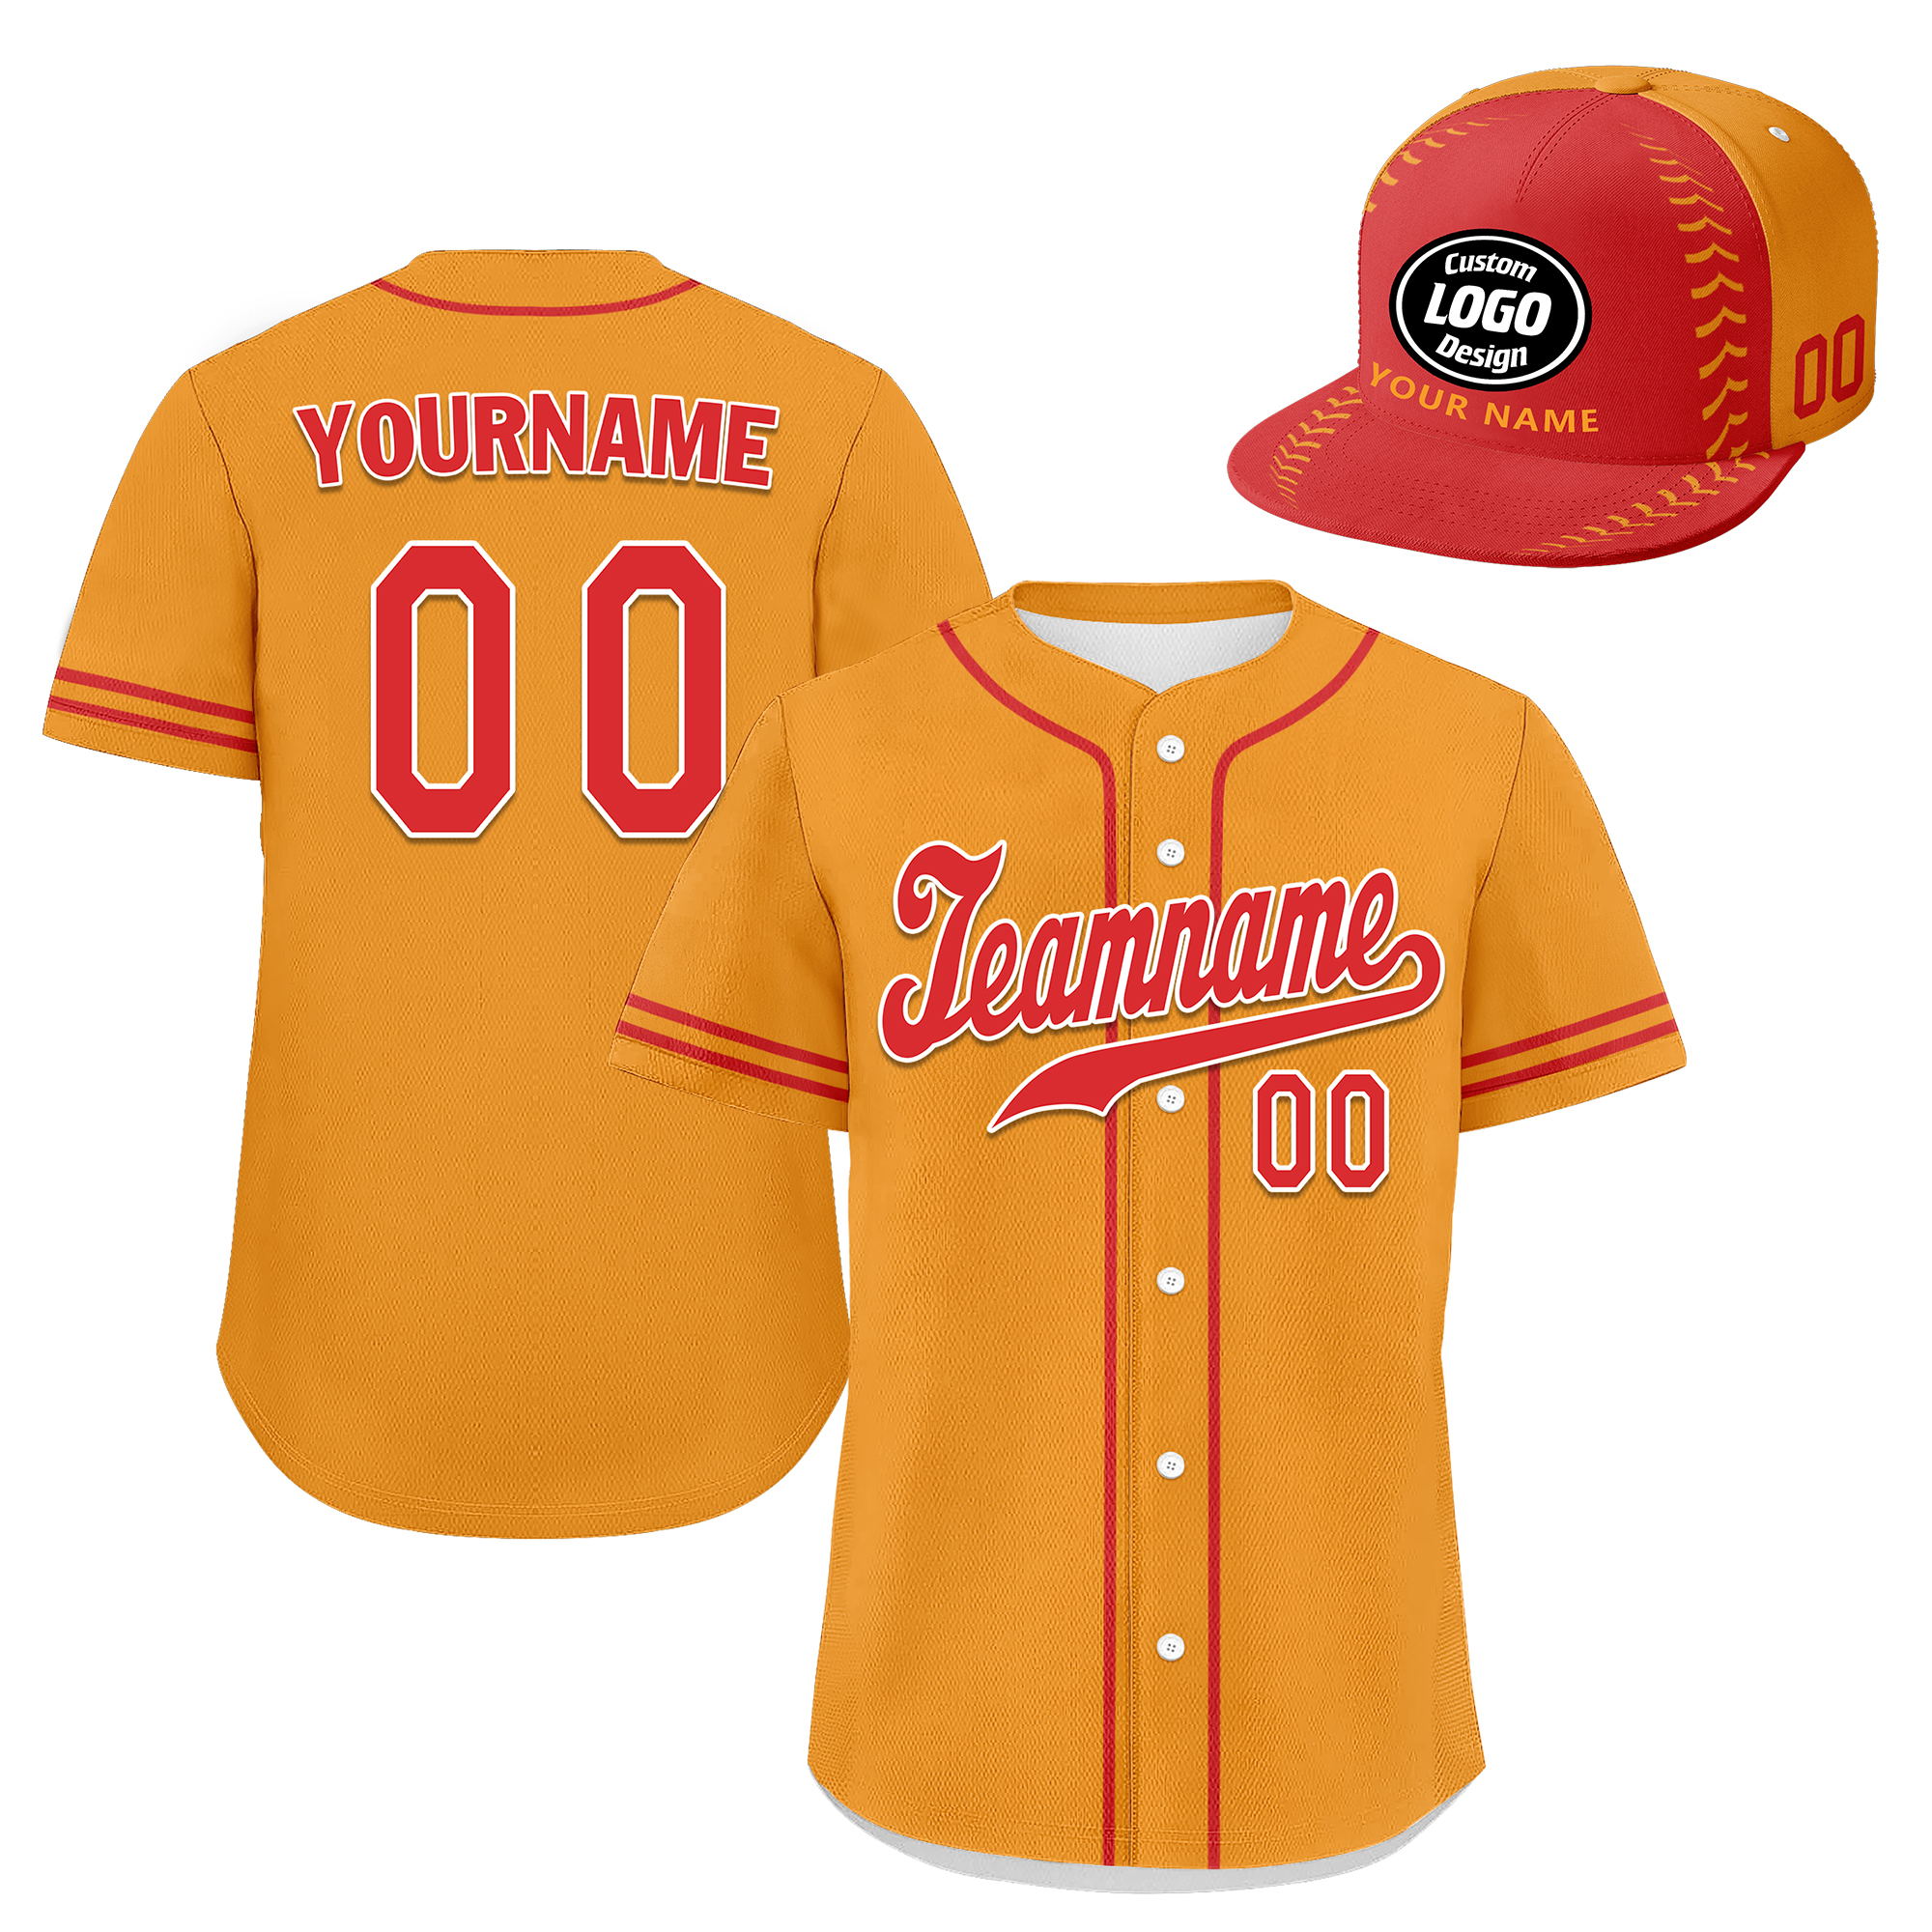 custom-baseball-uniform-hat-kits-personalized-design-printed-logo-picture-photo-on-baseball-jerseys-for-men-and-women-yellow-red-ZH-24020053-14